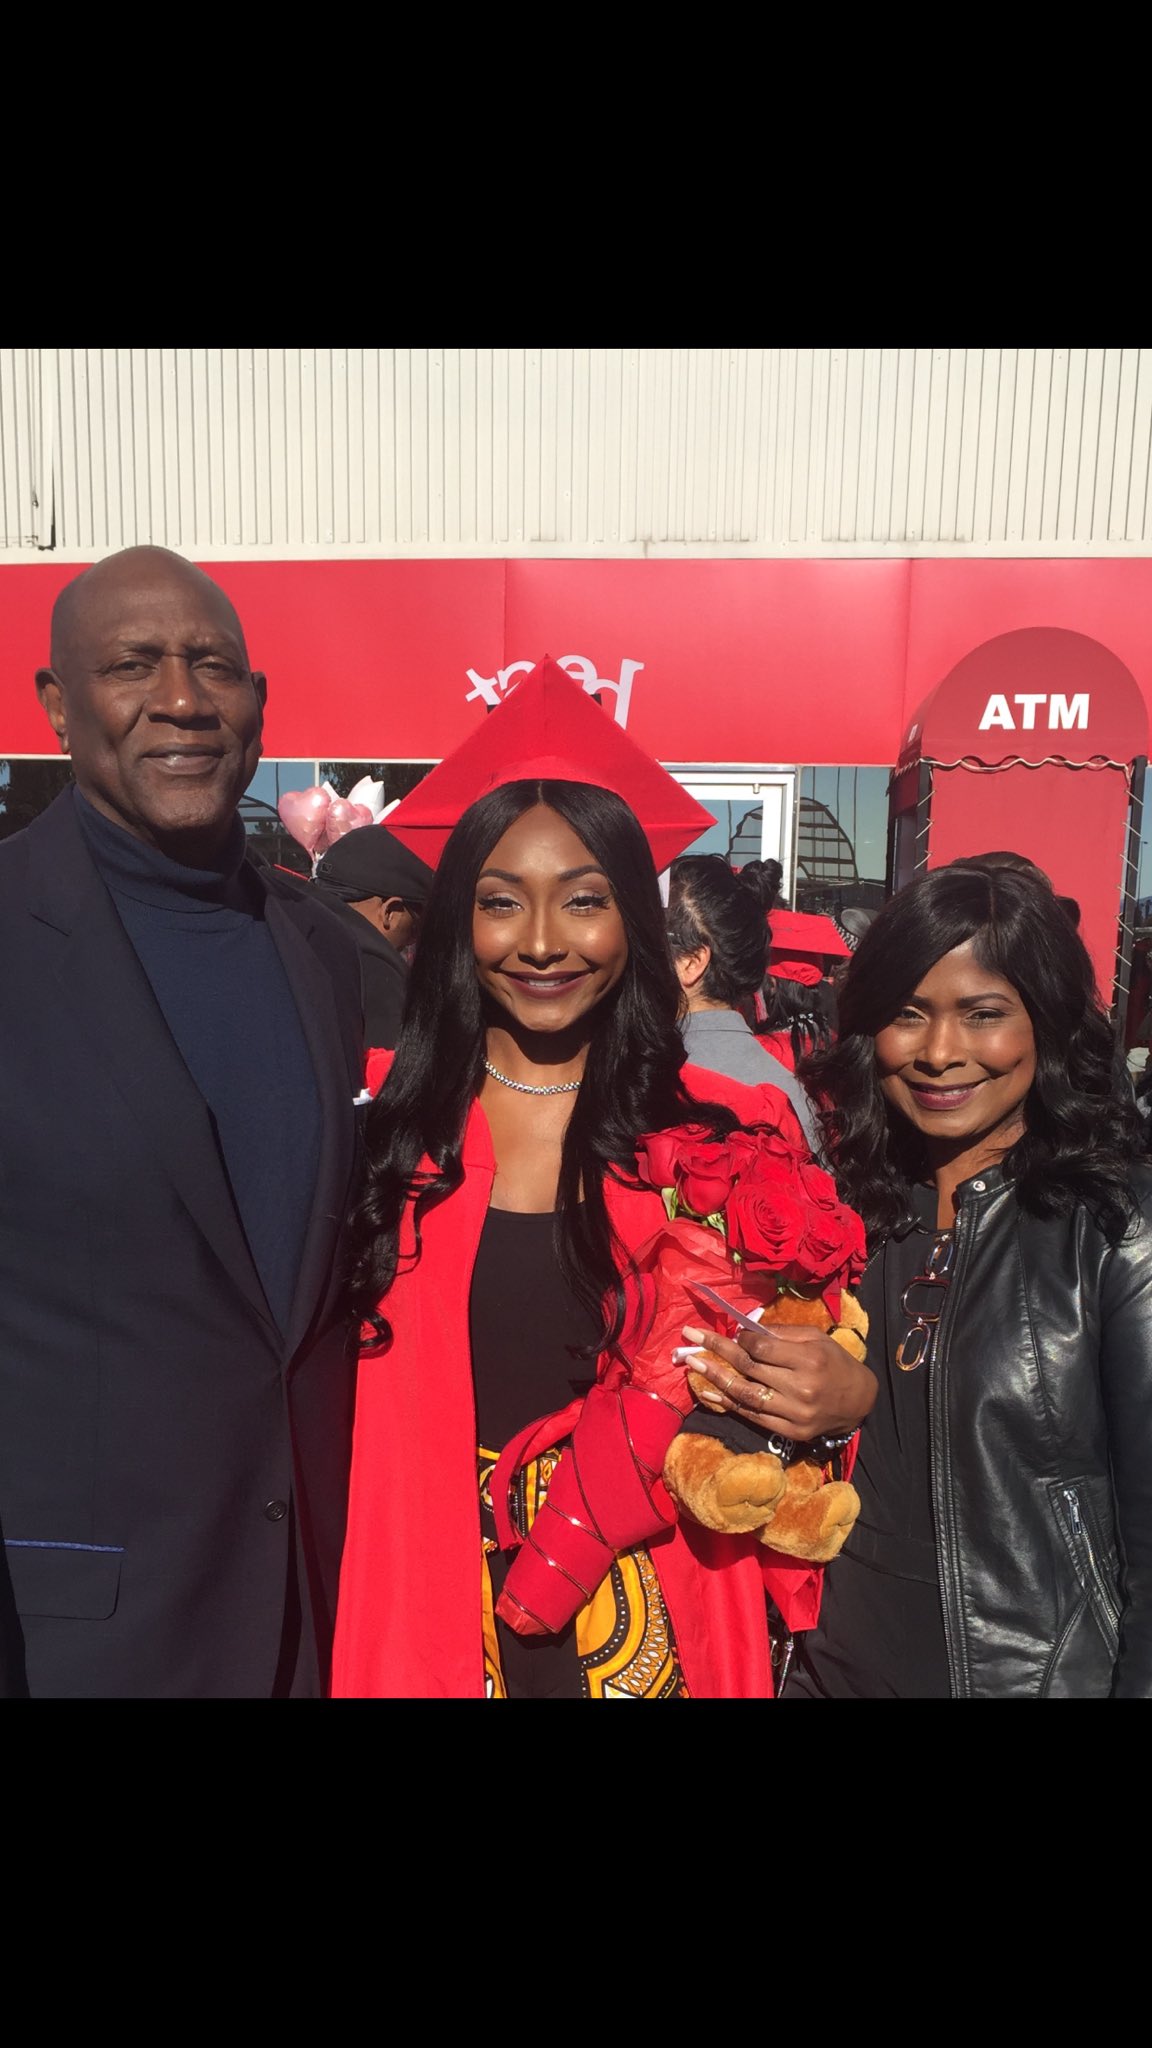 Spencer Haywood on Twitter: "Graduation day for my daughter Isis from